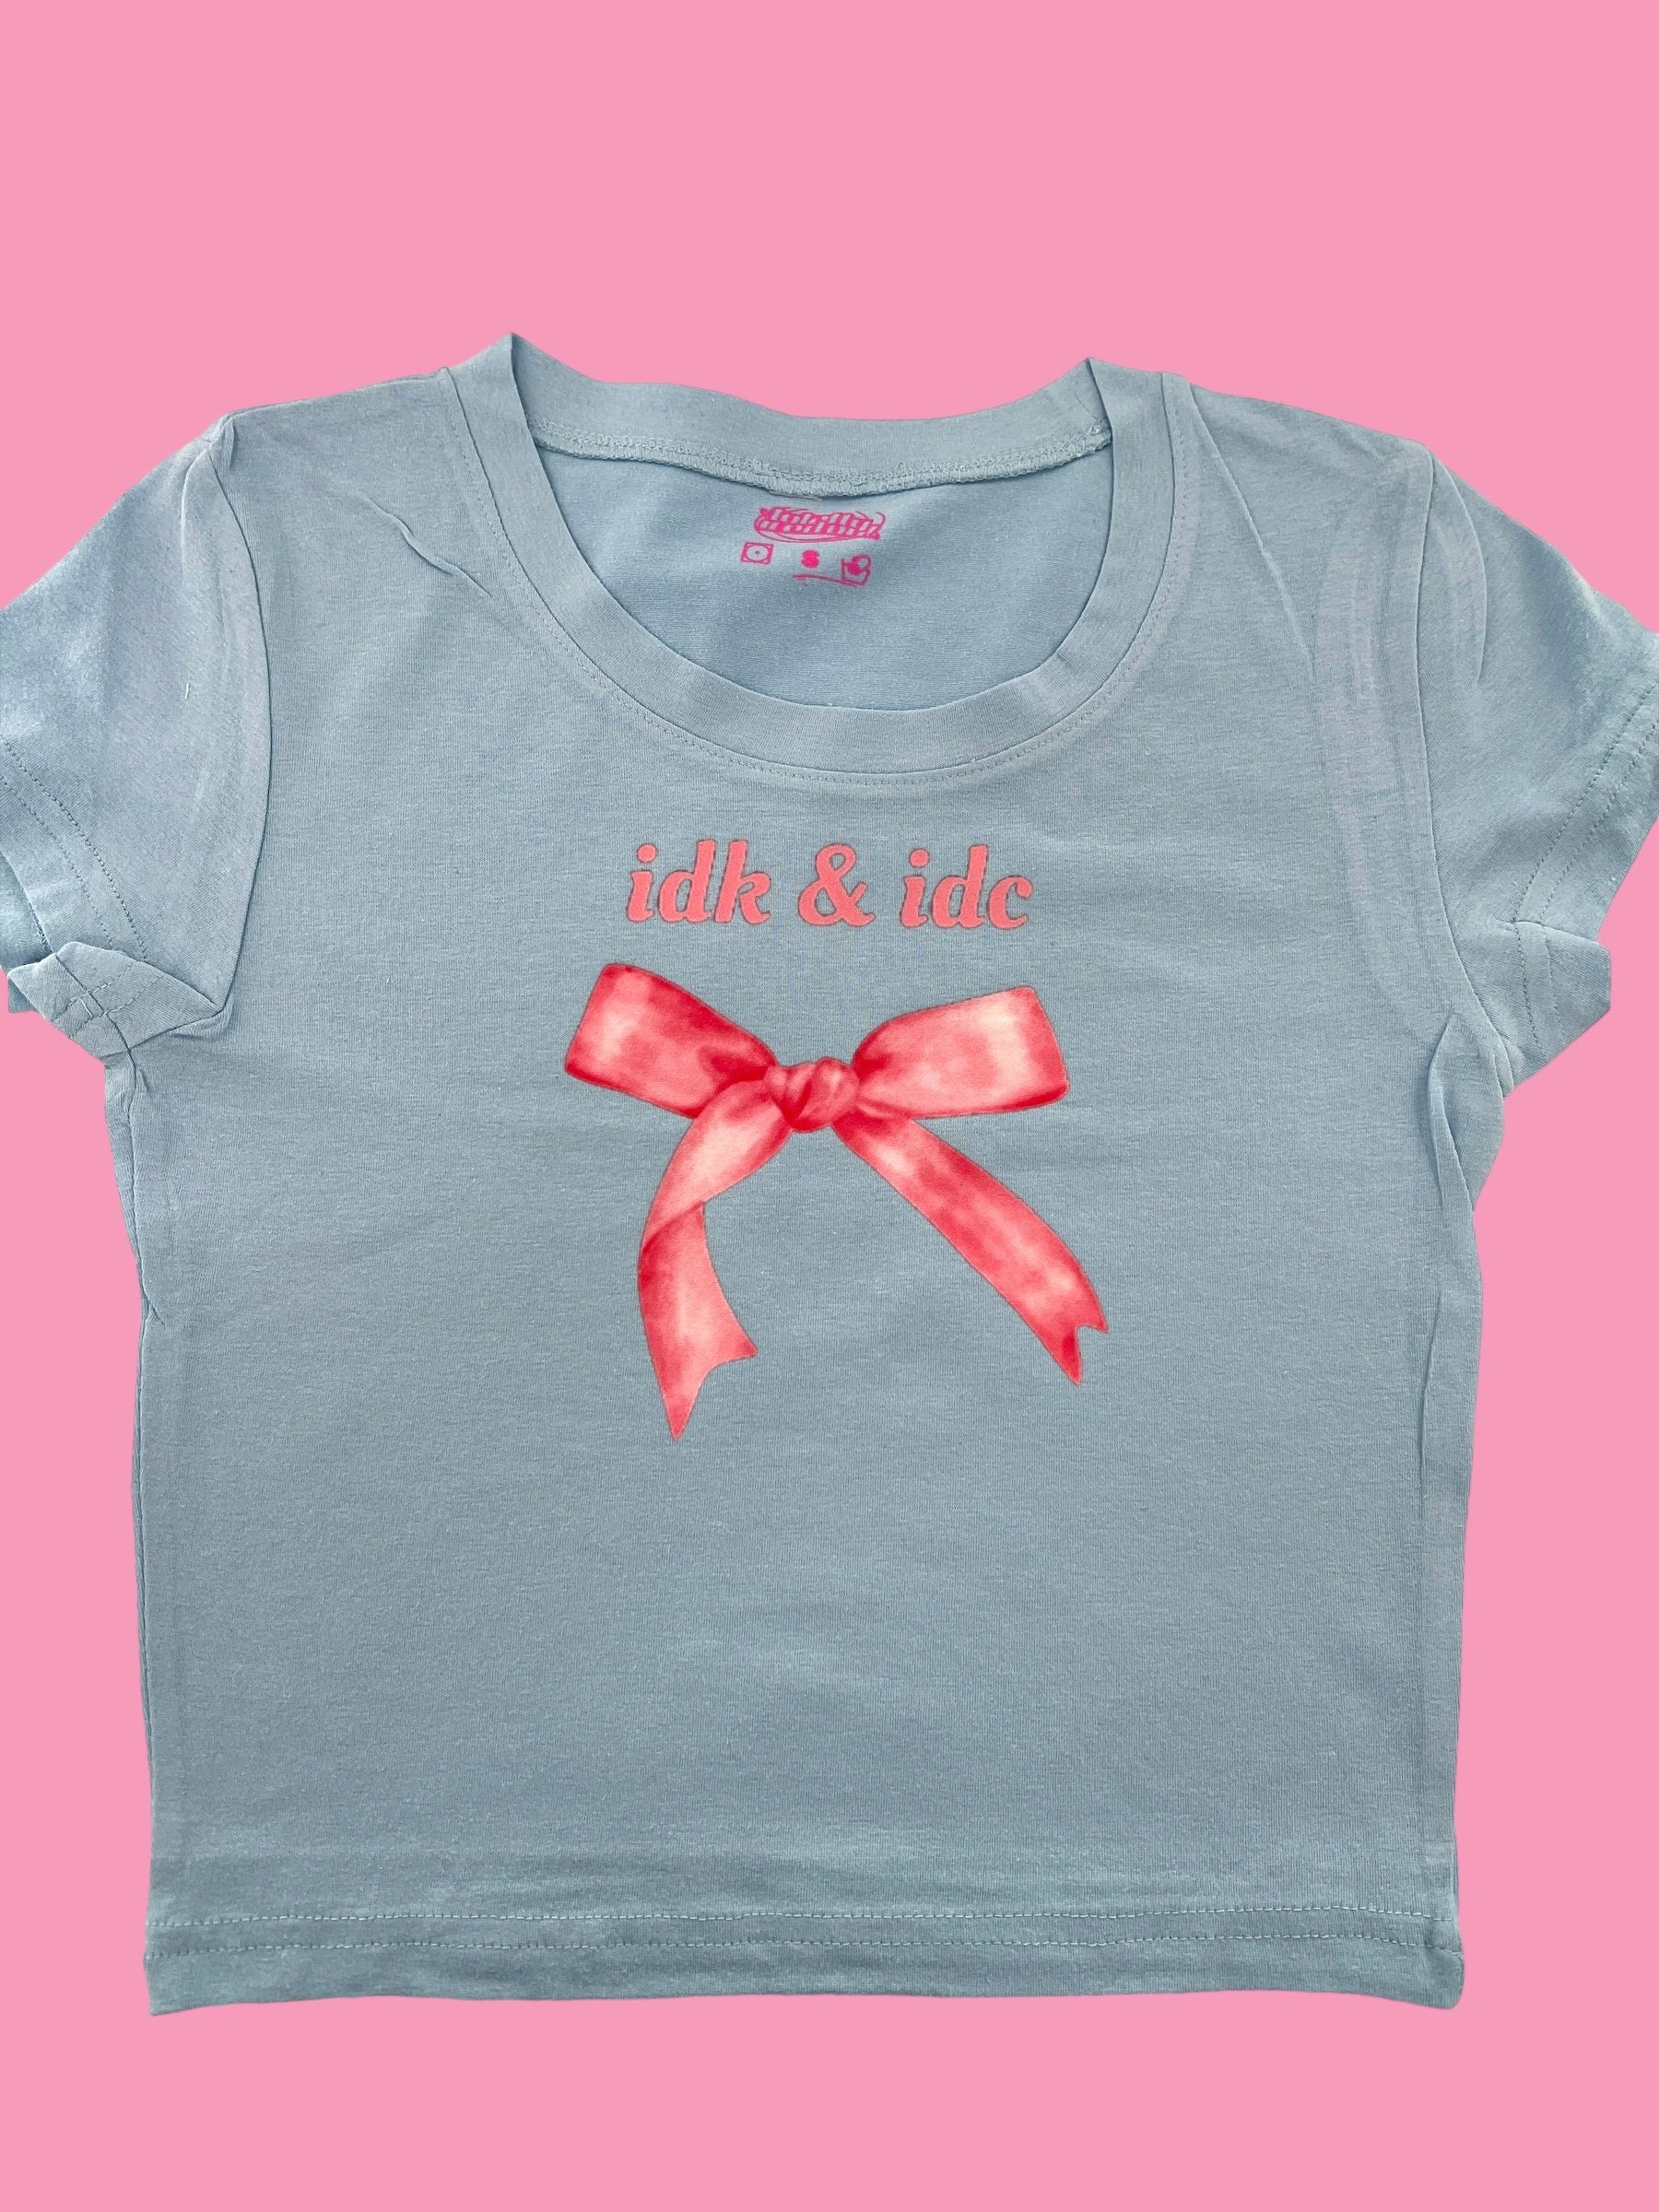 a blue t - shirt with a red bow on it